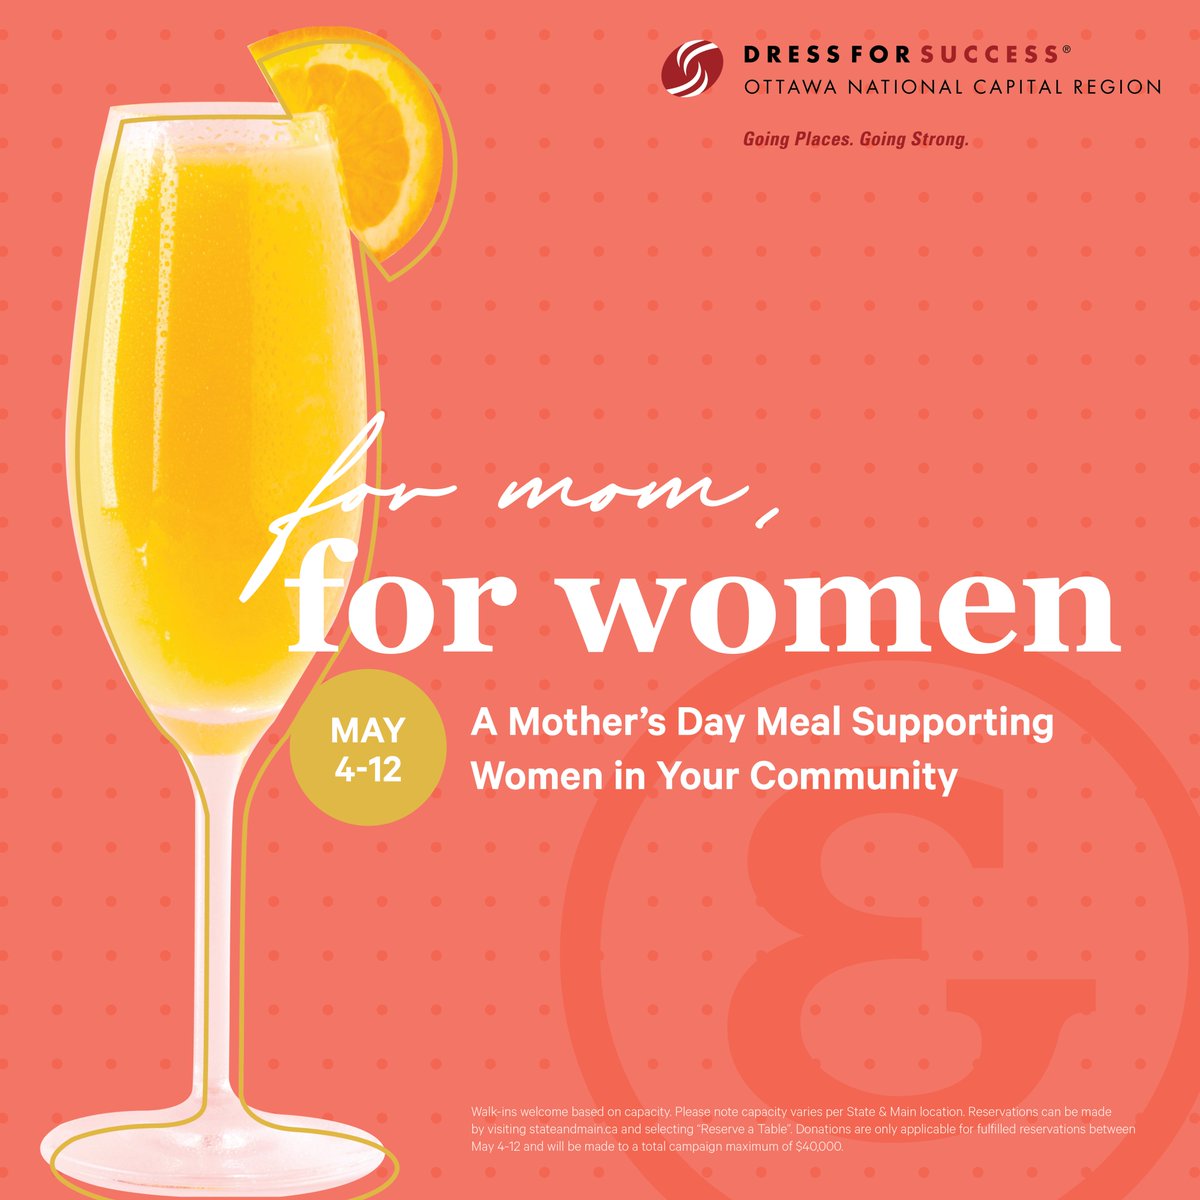 Let's make Mother's Day extra special! 🌷 From May 4-12, every reservation made at @stateandmain Gloucester means $10 goes straight to #DFSOttawa. Don't miss out on the chance to dine for a cause and celebrate Mom! Reserve your spot now at stateandmain.ca